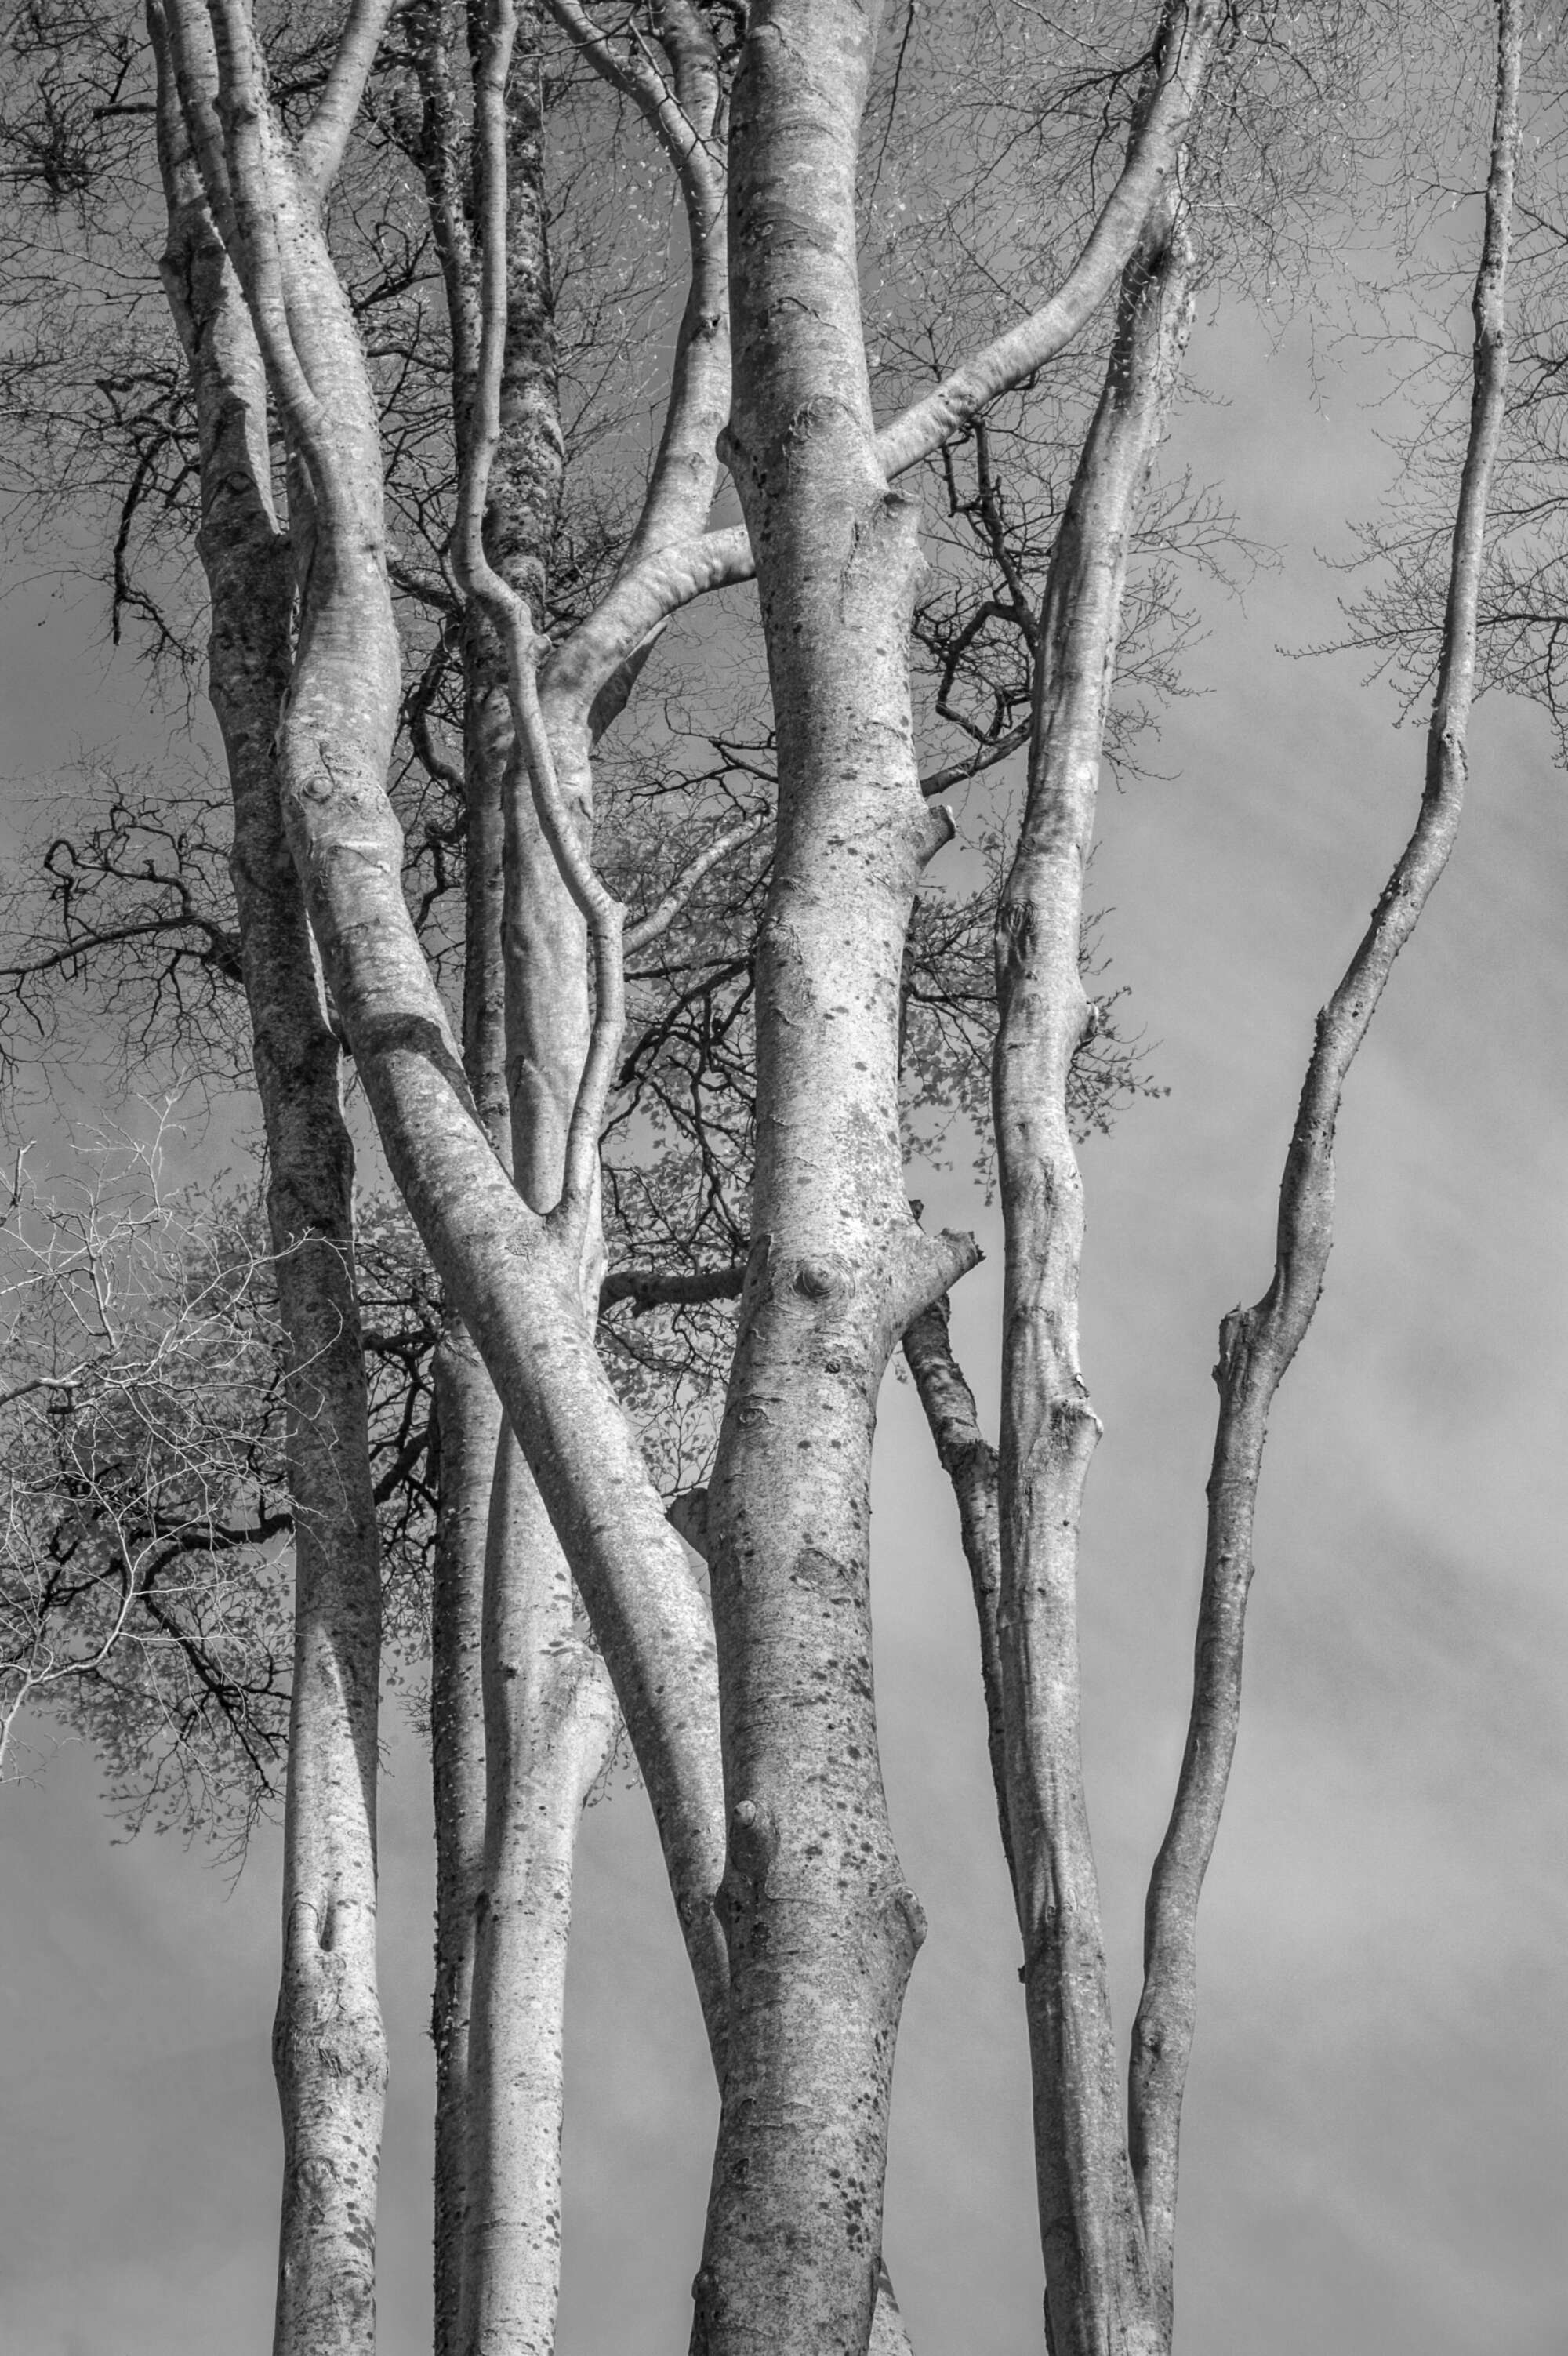 Applecross Beeches in Infrared Paul Gallagher aspect2i